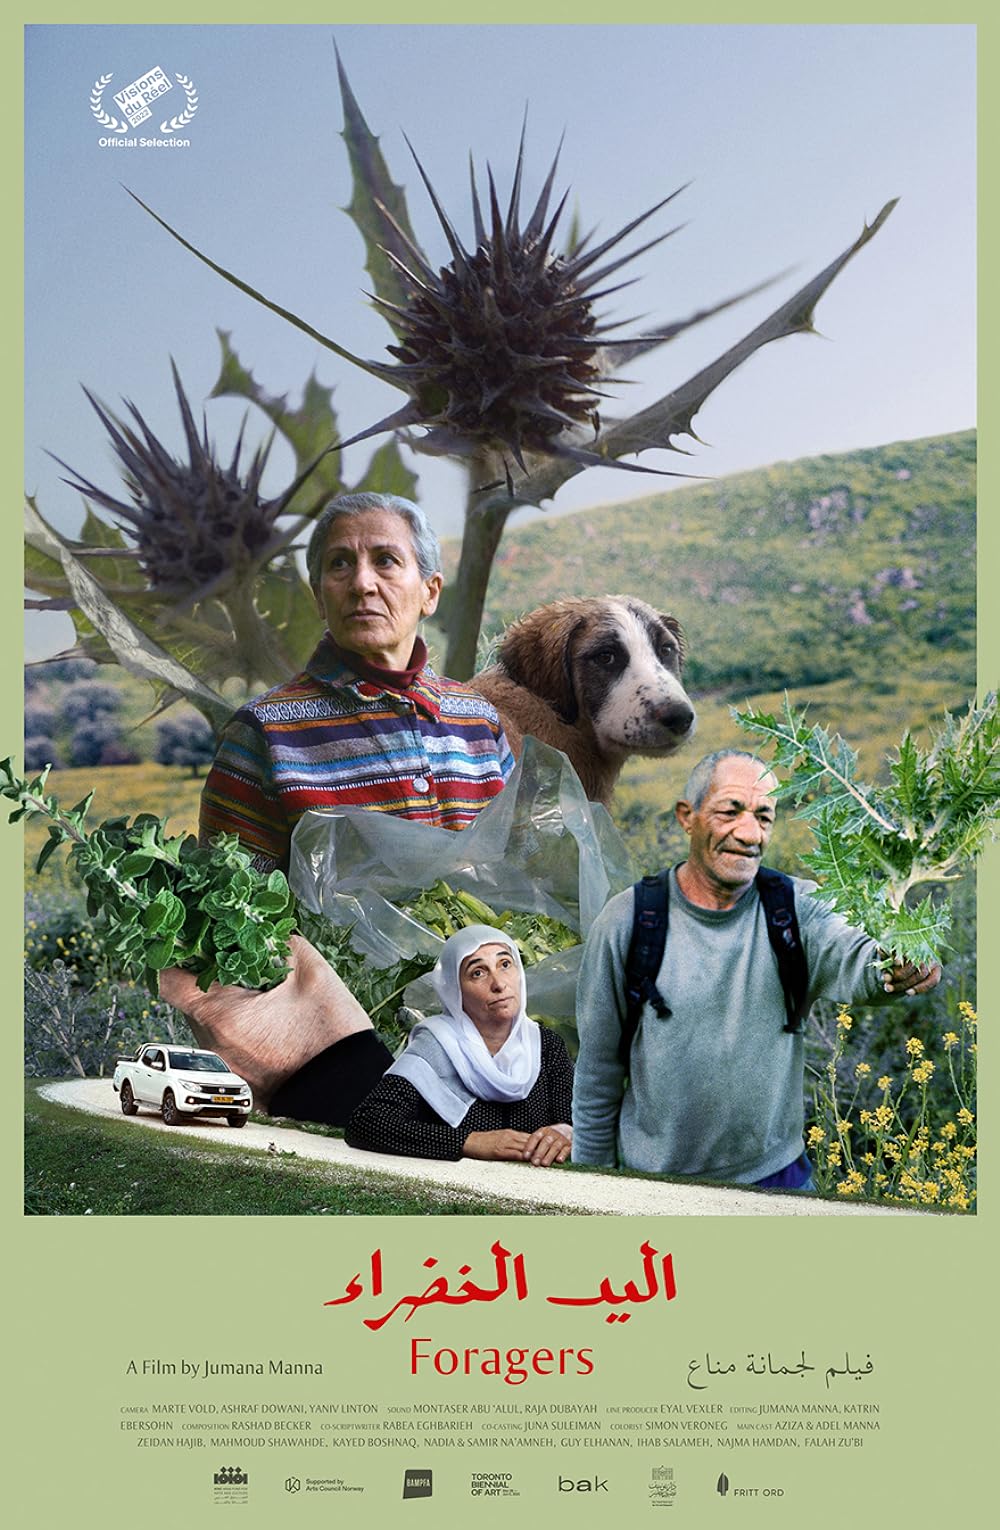 Foragers film poster